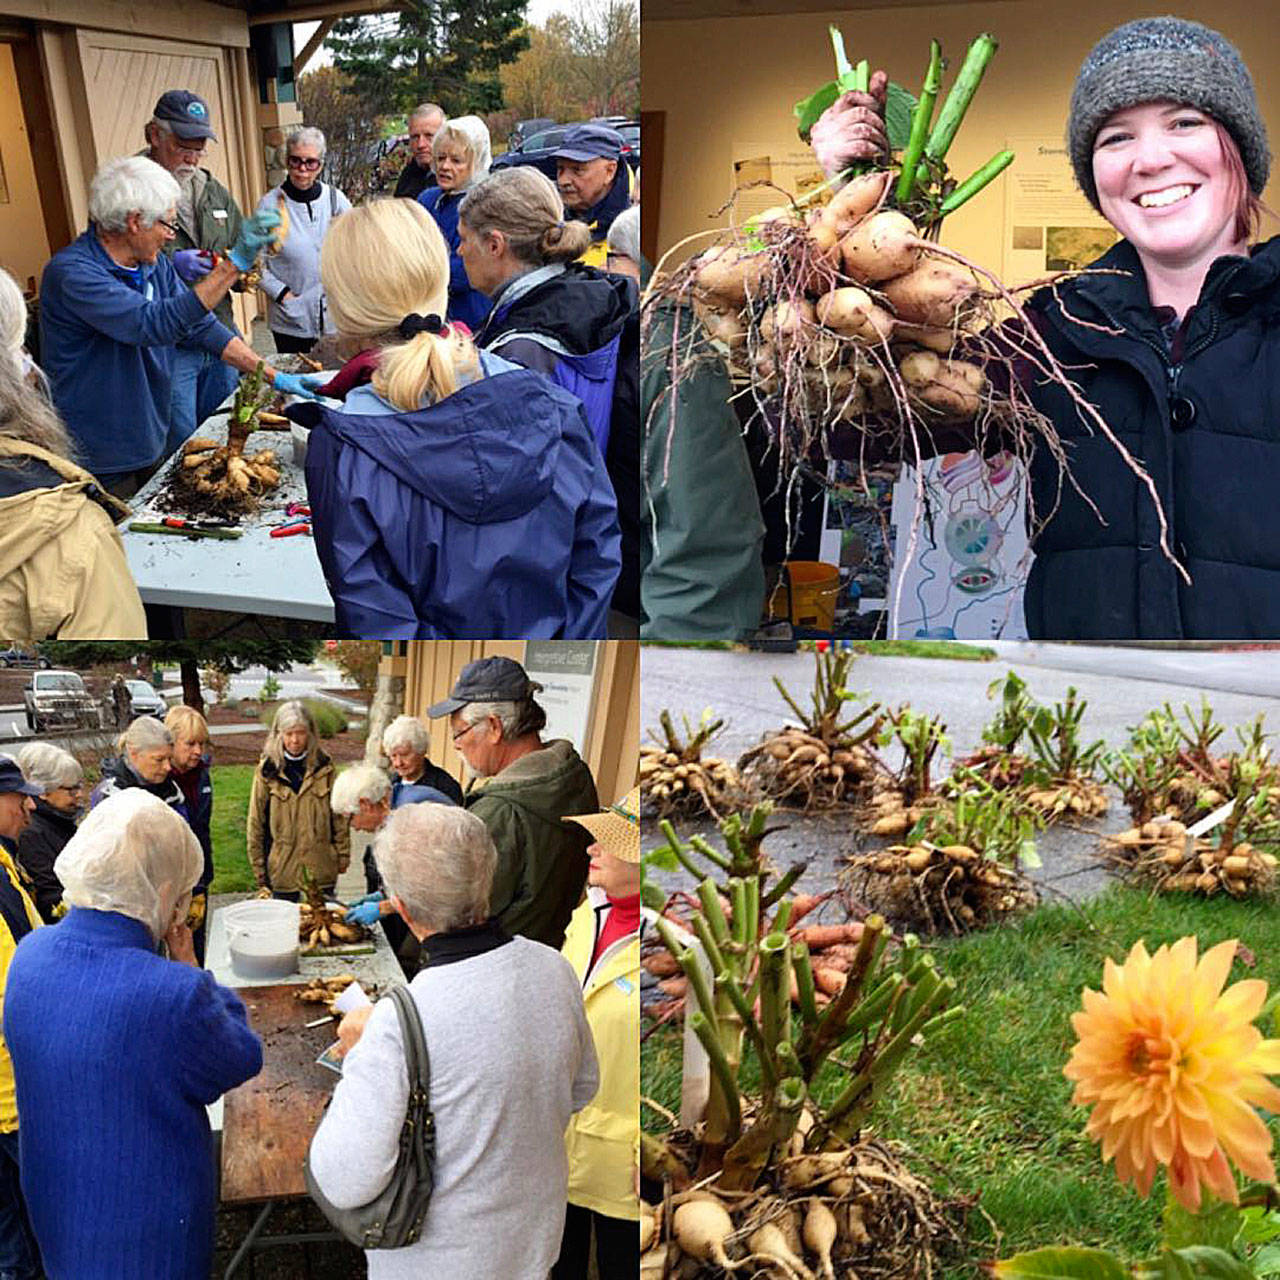 Lee Bowen leads a “Work to Learn” party at the Sequim Botanical Garden Society’s Terrace Garden in Sequim on April 27. Photos courtesy of Sequim Botanical Garden Society